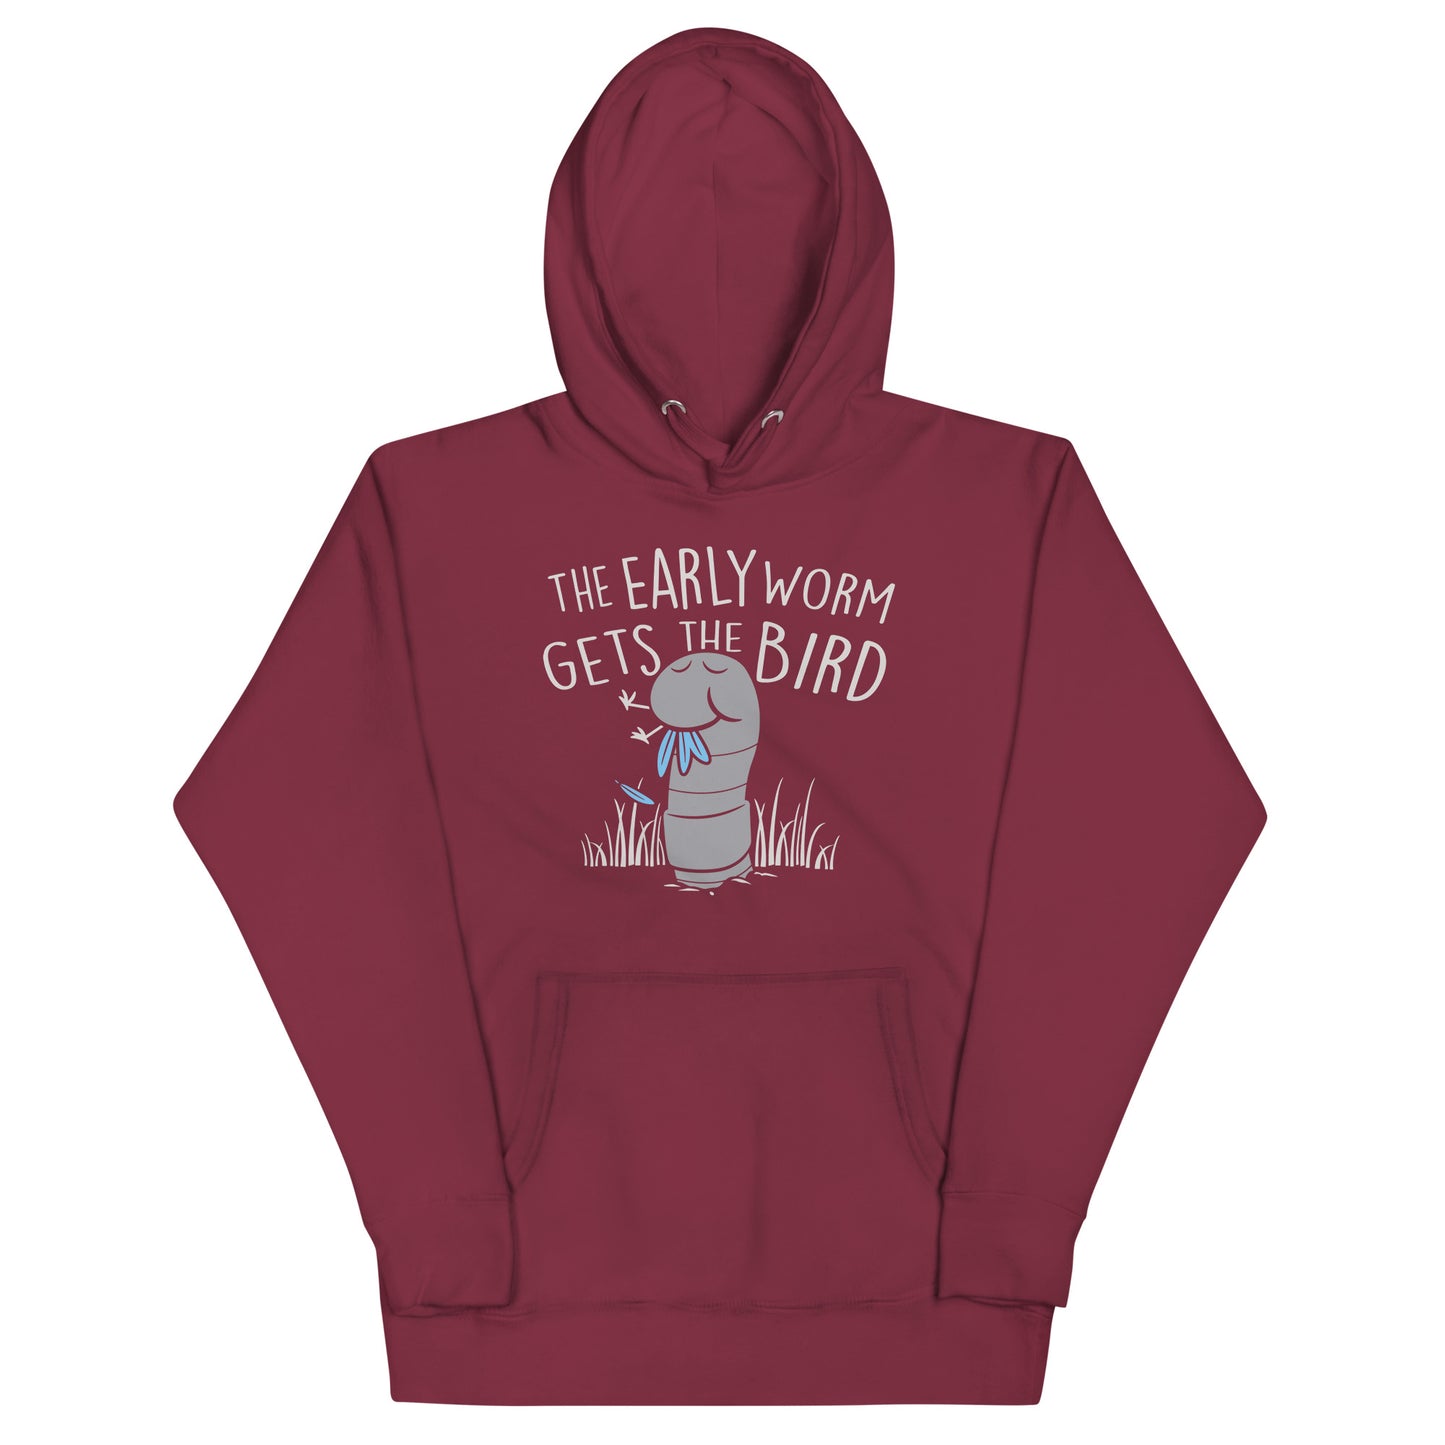 The Early Worm Gets The Bird Unisex Hoodie